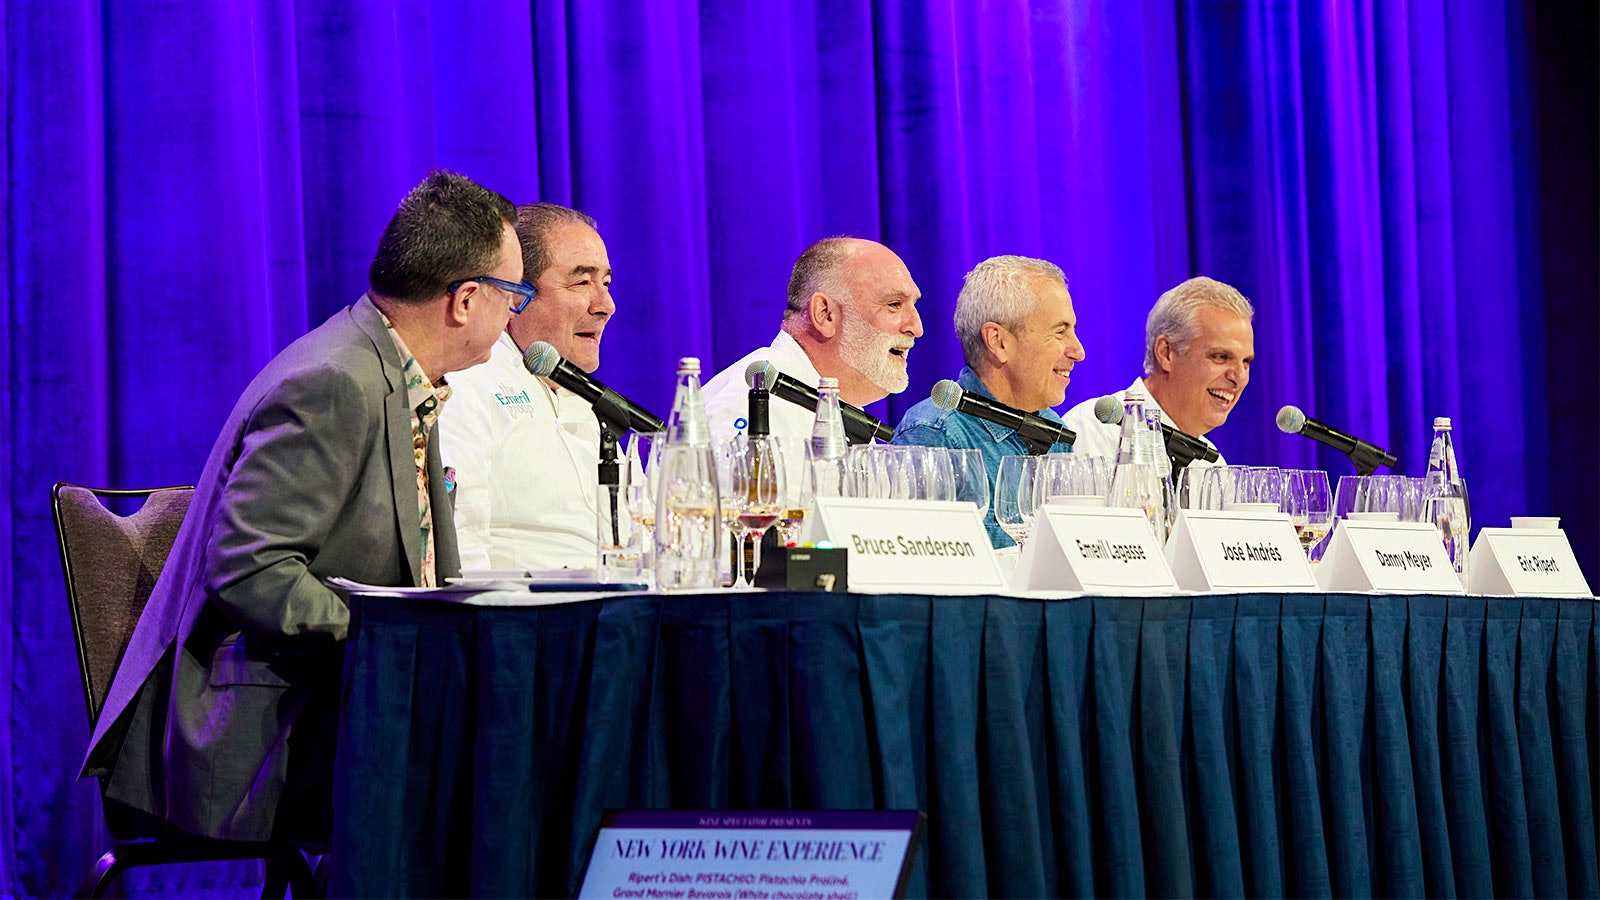  The Chefs Challenge participants: Bruce Sanderson, Emeril Lagasse, José Andrés, Danny Meyer and Eric Ripert at the 2023 New York Wine Experience seminars